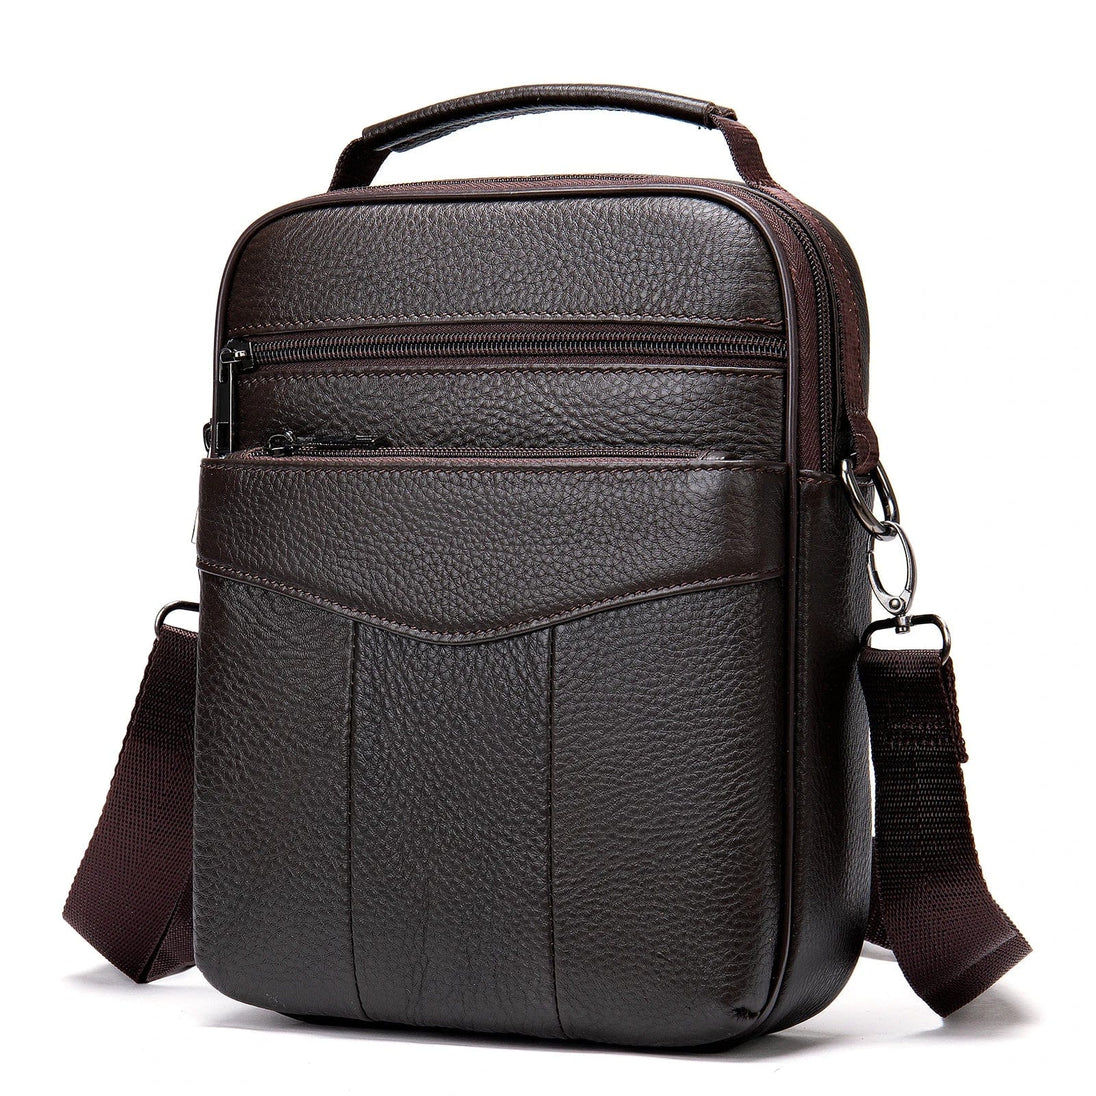 Style Redefined: Discover the Luxury of Leather in our Designer Men's Shoulder Bags